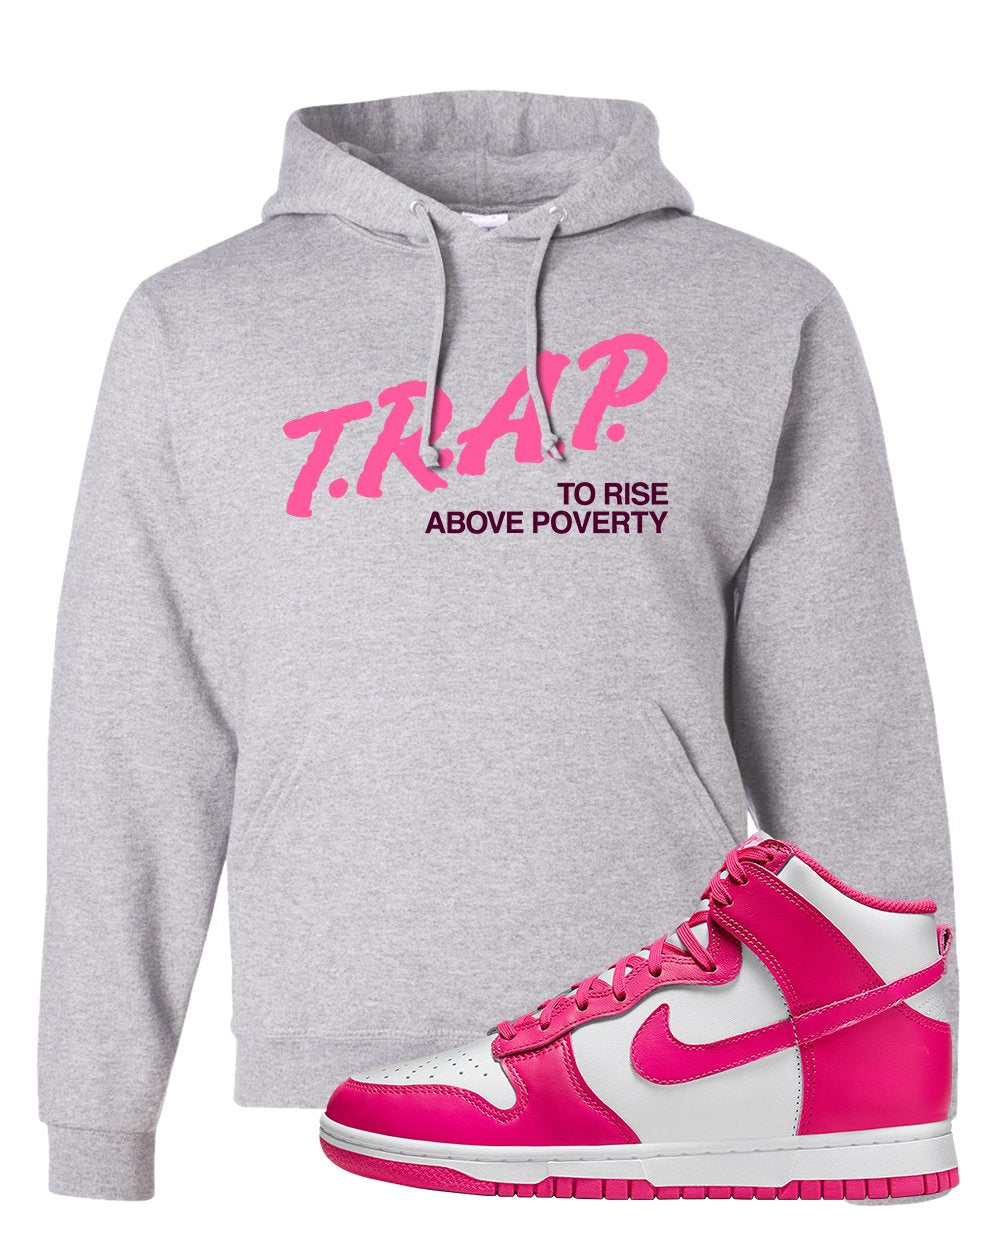 Pink Prime High Dunks Hoodie | Trap To Rise Above Poverty, Ash